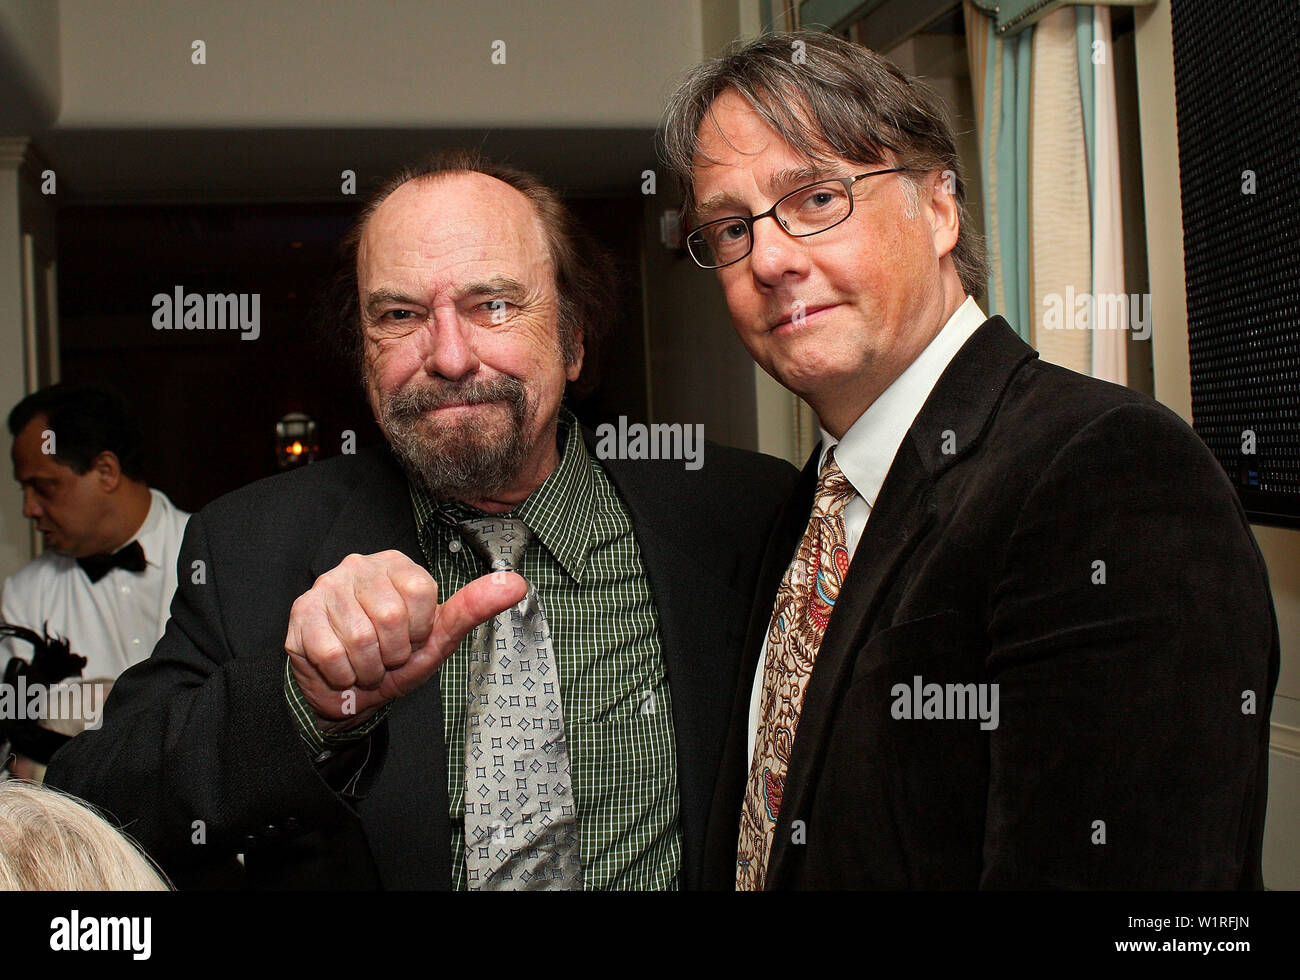 New York, NY - February 22:  Actor, Rip Torn, Director, Mitchell Lichtenstein at the 81st Annual Academy Awards - Official New York Oscar Night Party at The Carlyle on February 22, 2009 in New York, NY. (Photo by Steve Mack/Alamy) Stock Photo